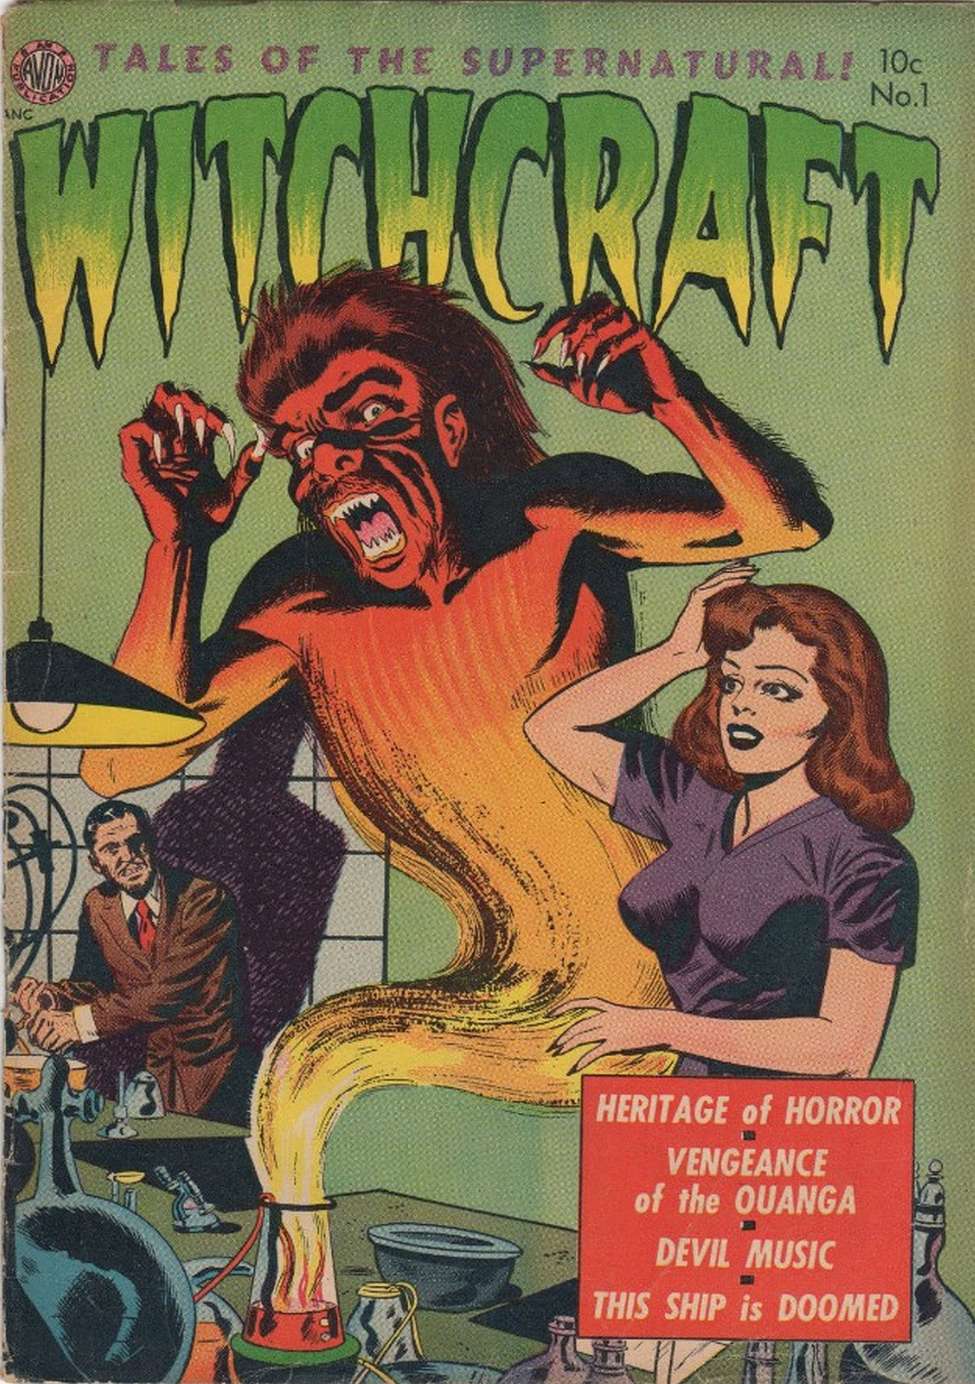 Book Cover For Witchcraft 1